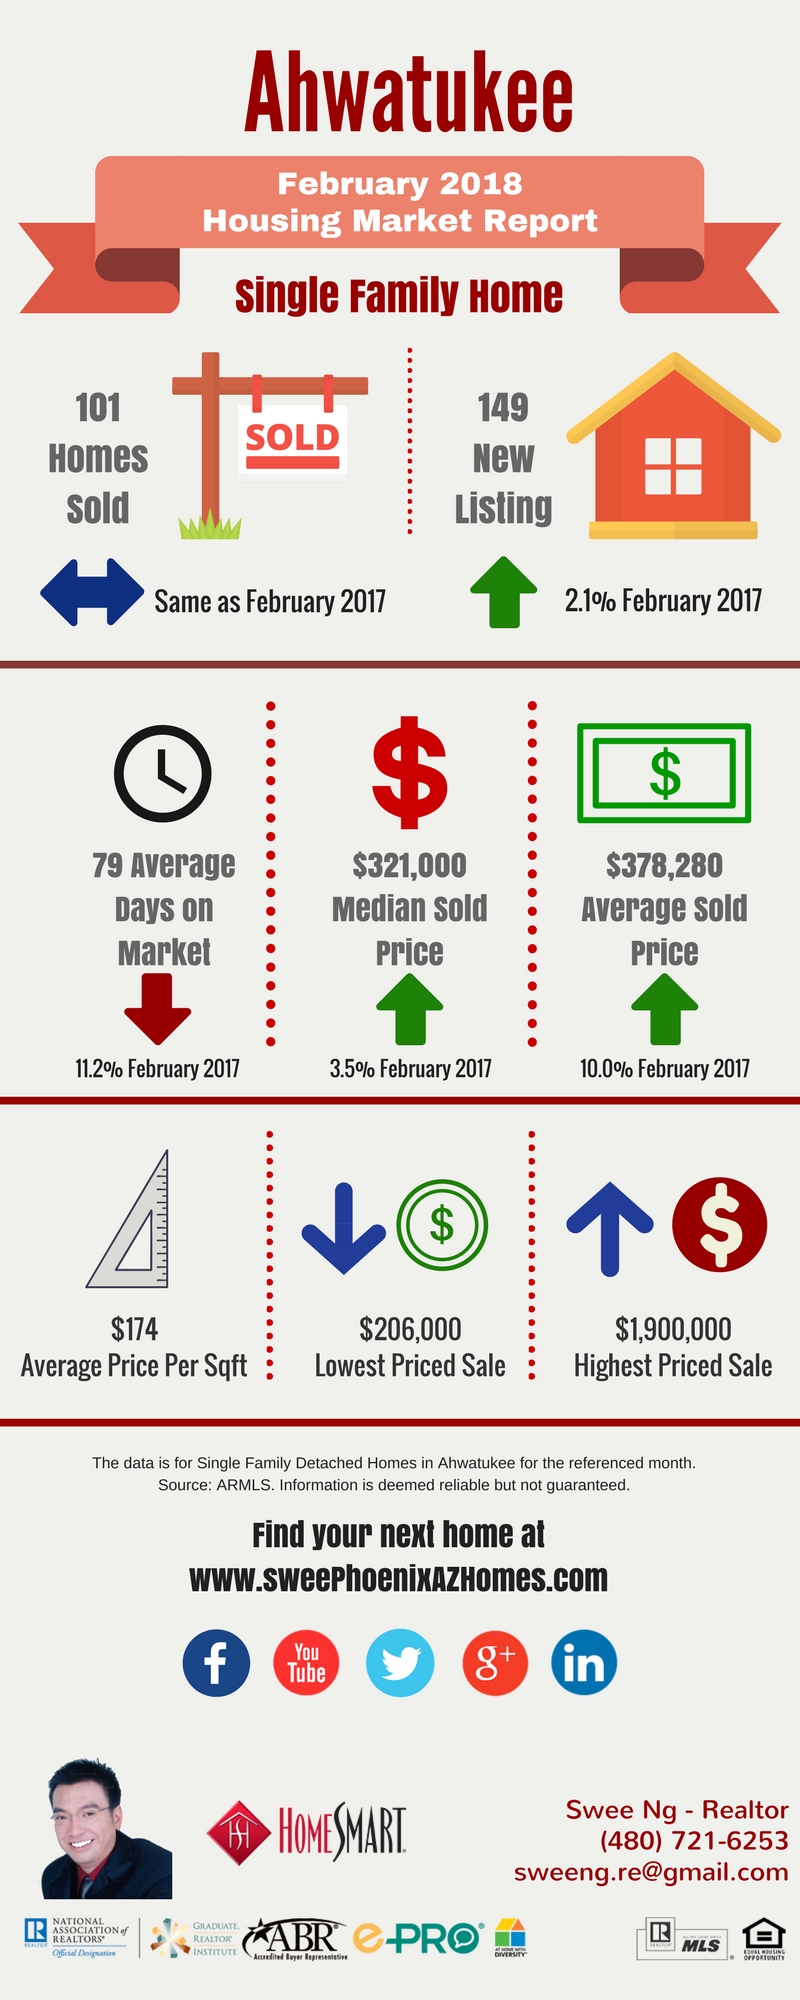 Ahwatukee Housing Market Trends Report February 2018, House Value, Real Estate and Statistic by Swee Ng